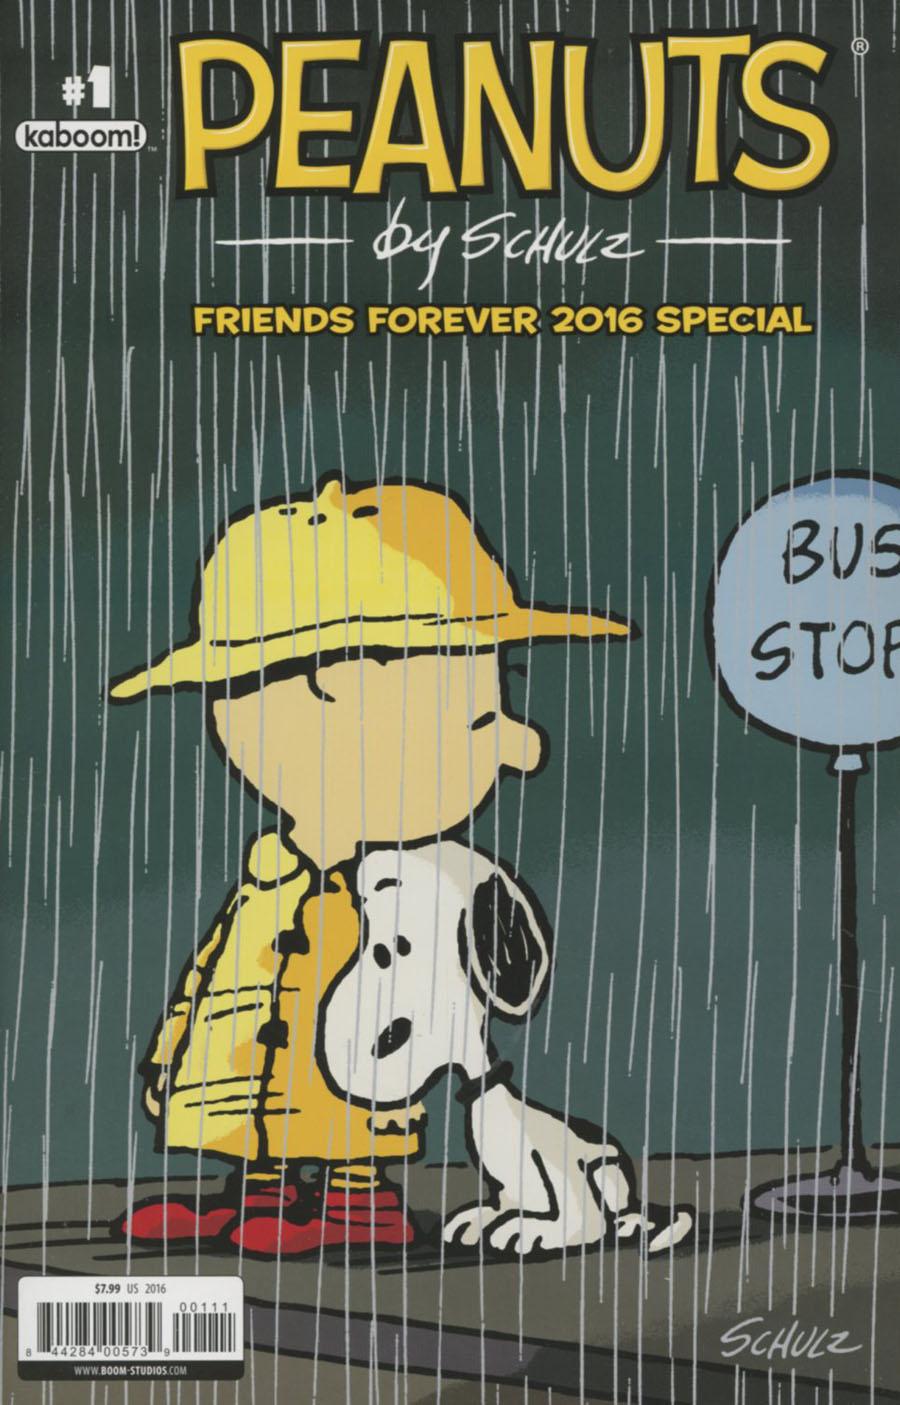 Peanuts Friends Forever 2016 Special Vol. 1 #1